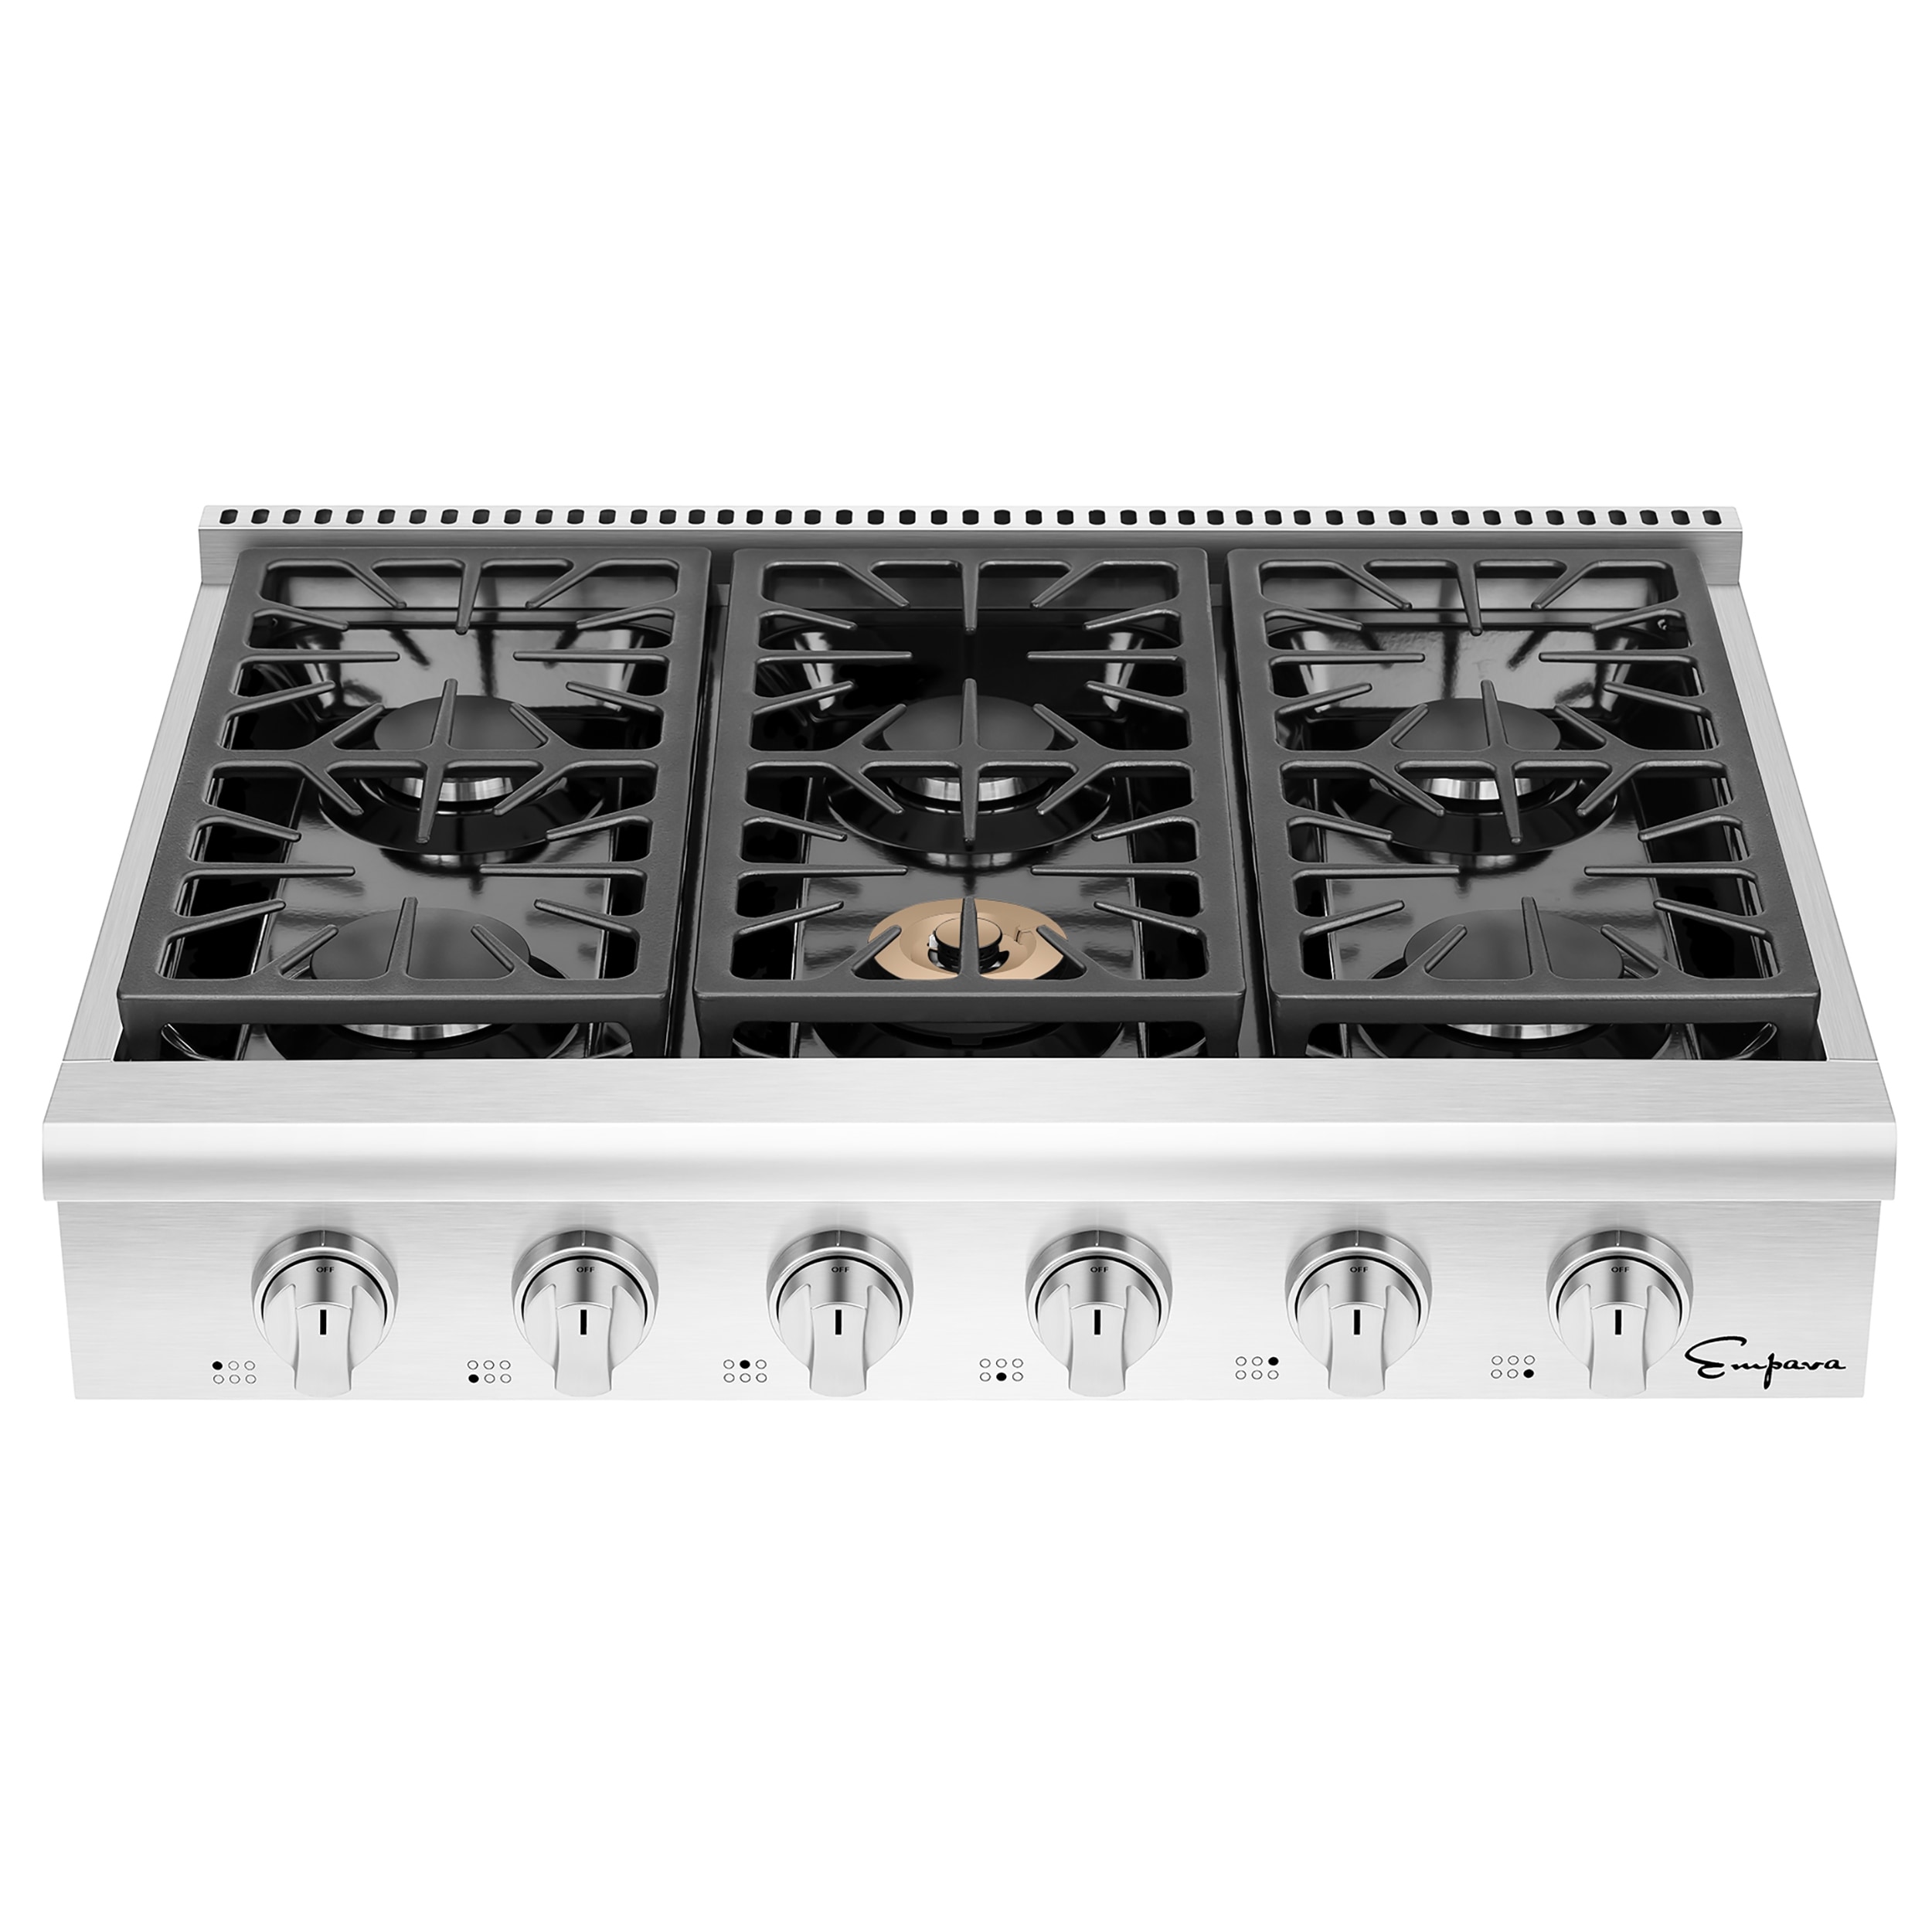 36 in. Pro-Style Slide-in Natural Gas Rangetop with 6 Deep Recessed Sealed Burners in Stainless Steel - 36 Inch